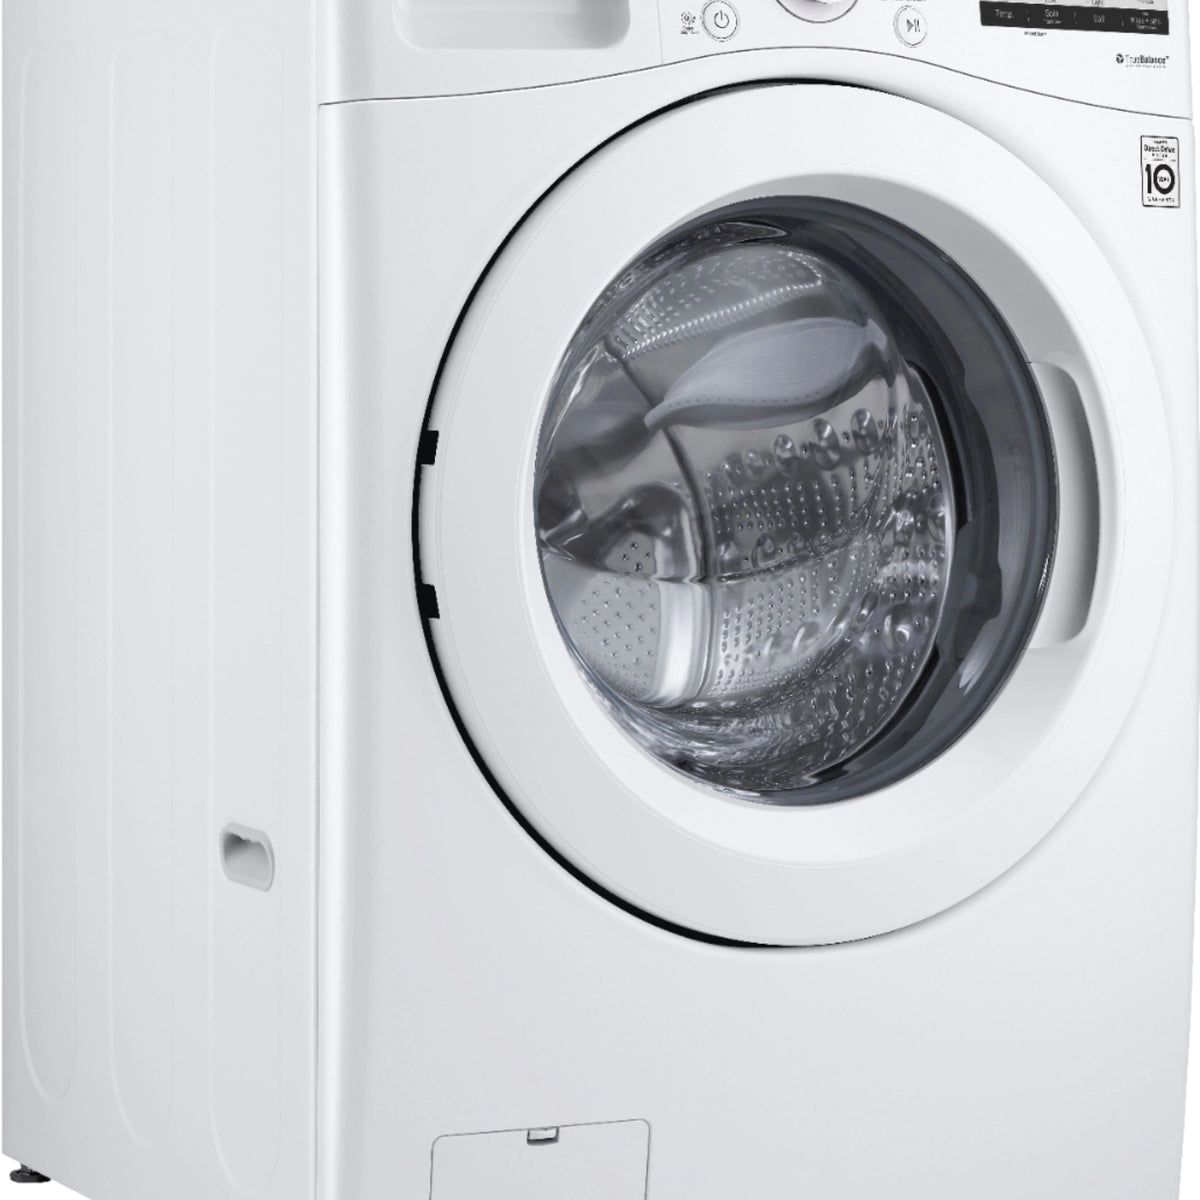 LG 27 in. 5.0 cu. ft. Stackable Front Load Washer with 6 Motion